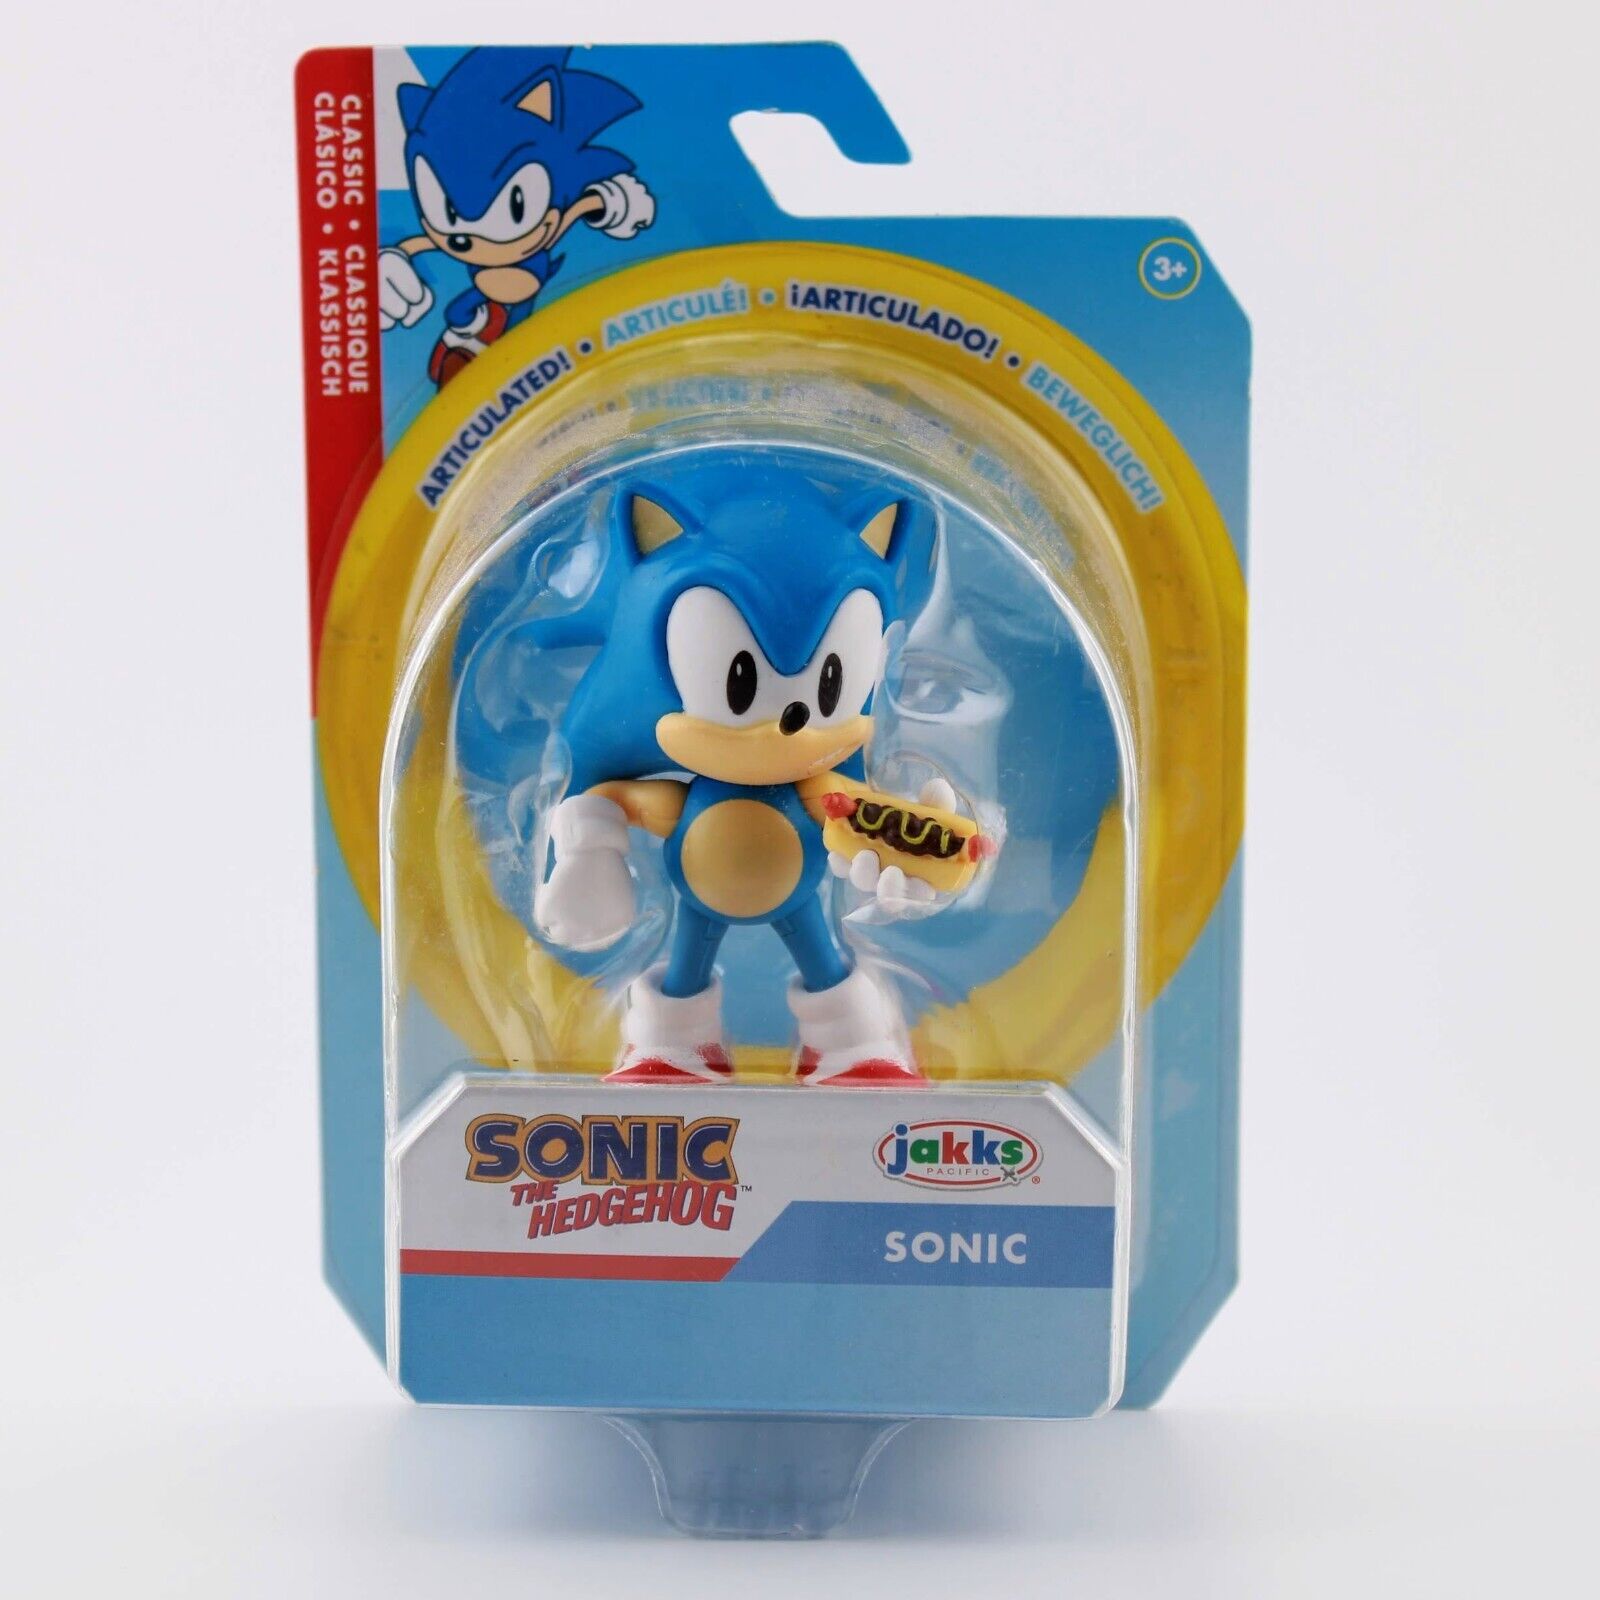 Sonic the Hedgehog - Sonic with Hot Dog - Jakks Pacific 2.5" Action Figure